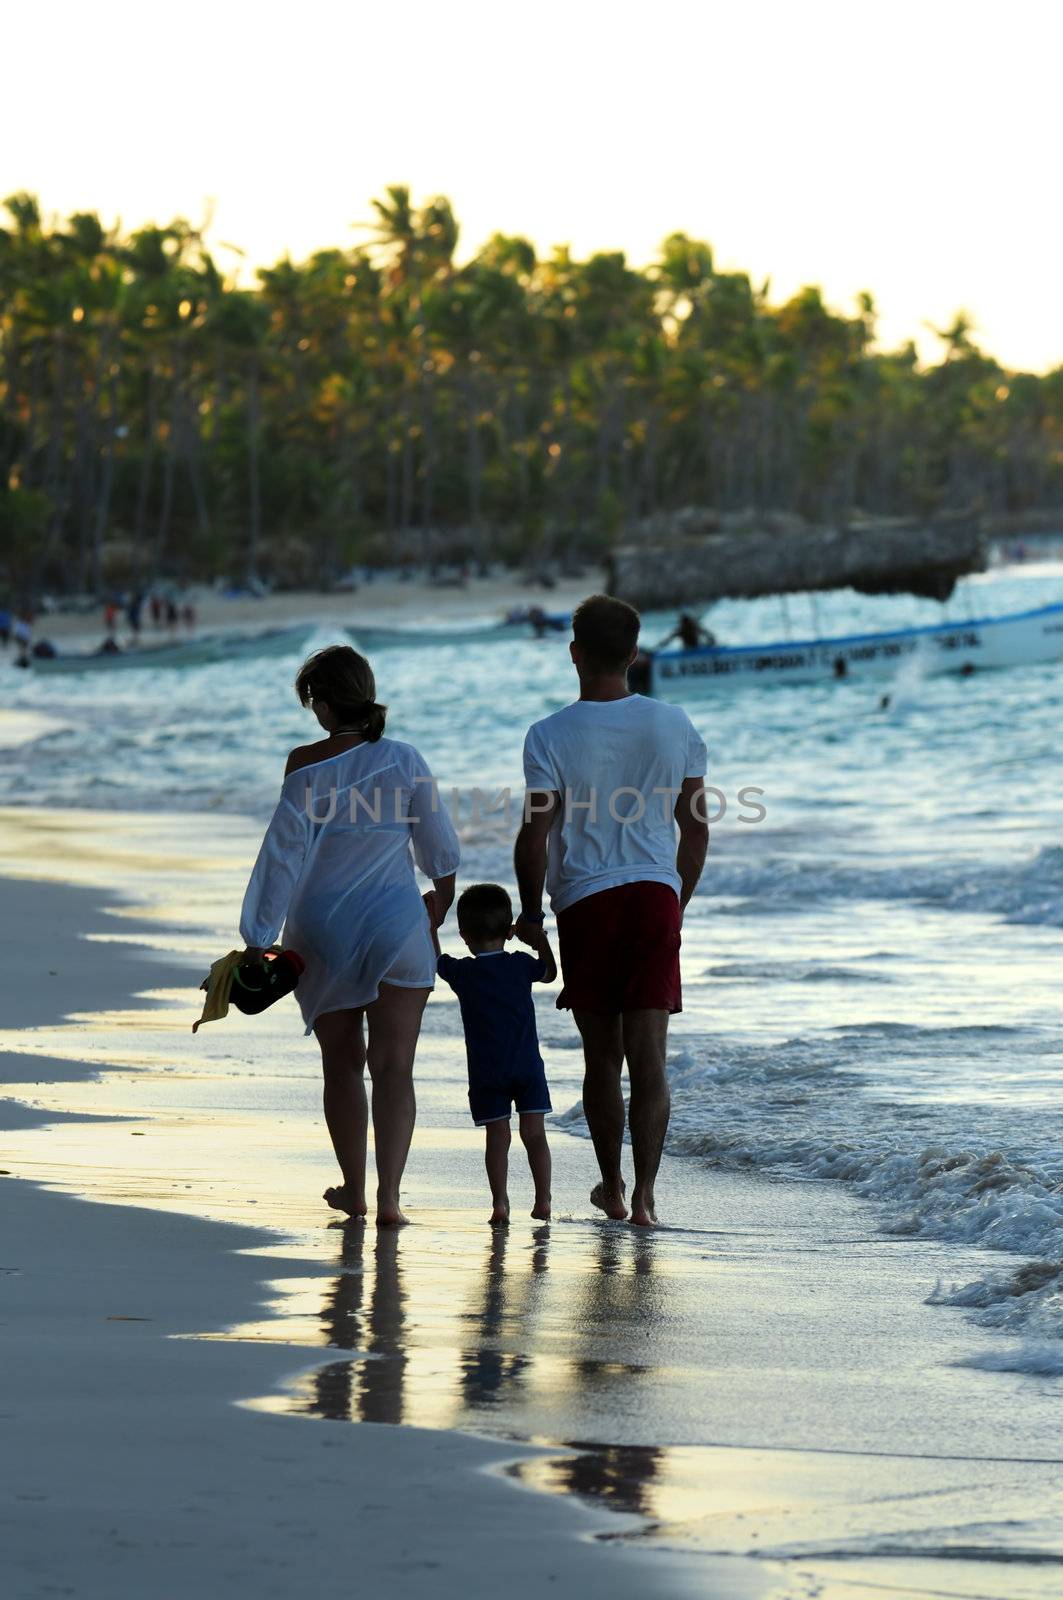 Family taking a walk on a sandy beach of tropical resort